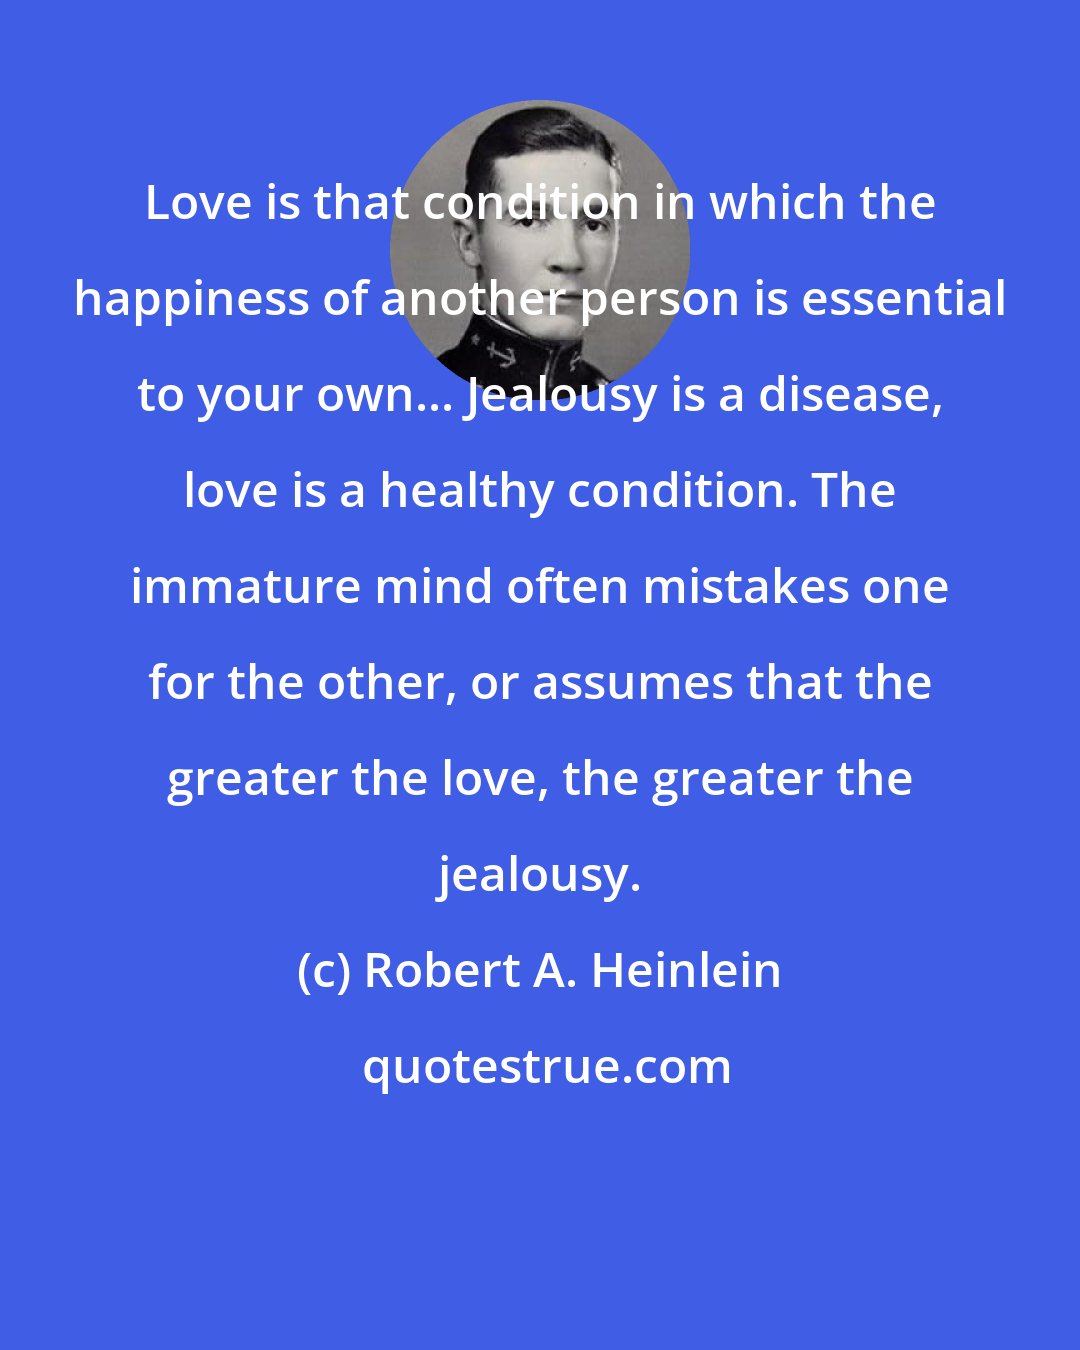 Robert A. Heinlein: Love is that condition in which the happiness of another person is essential to your own... Jealousy is a disease, love is a healthy condition. The immature mind often mistakes one for the other, or assumes that the greater the love, the greater the jealousy.